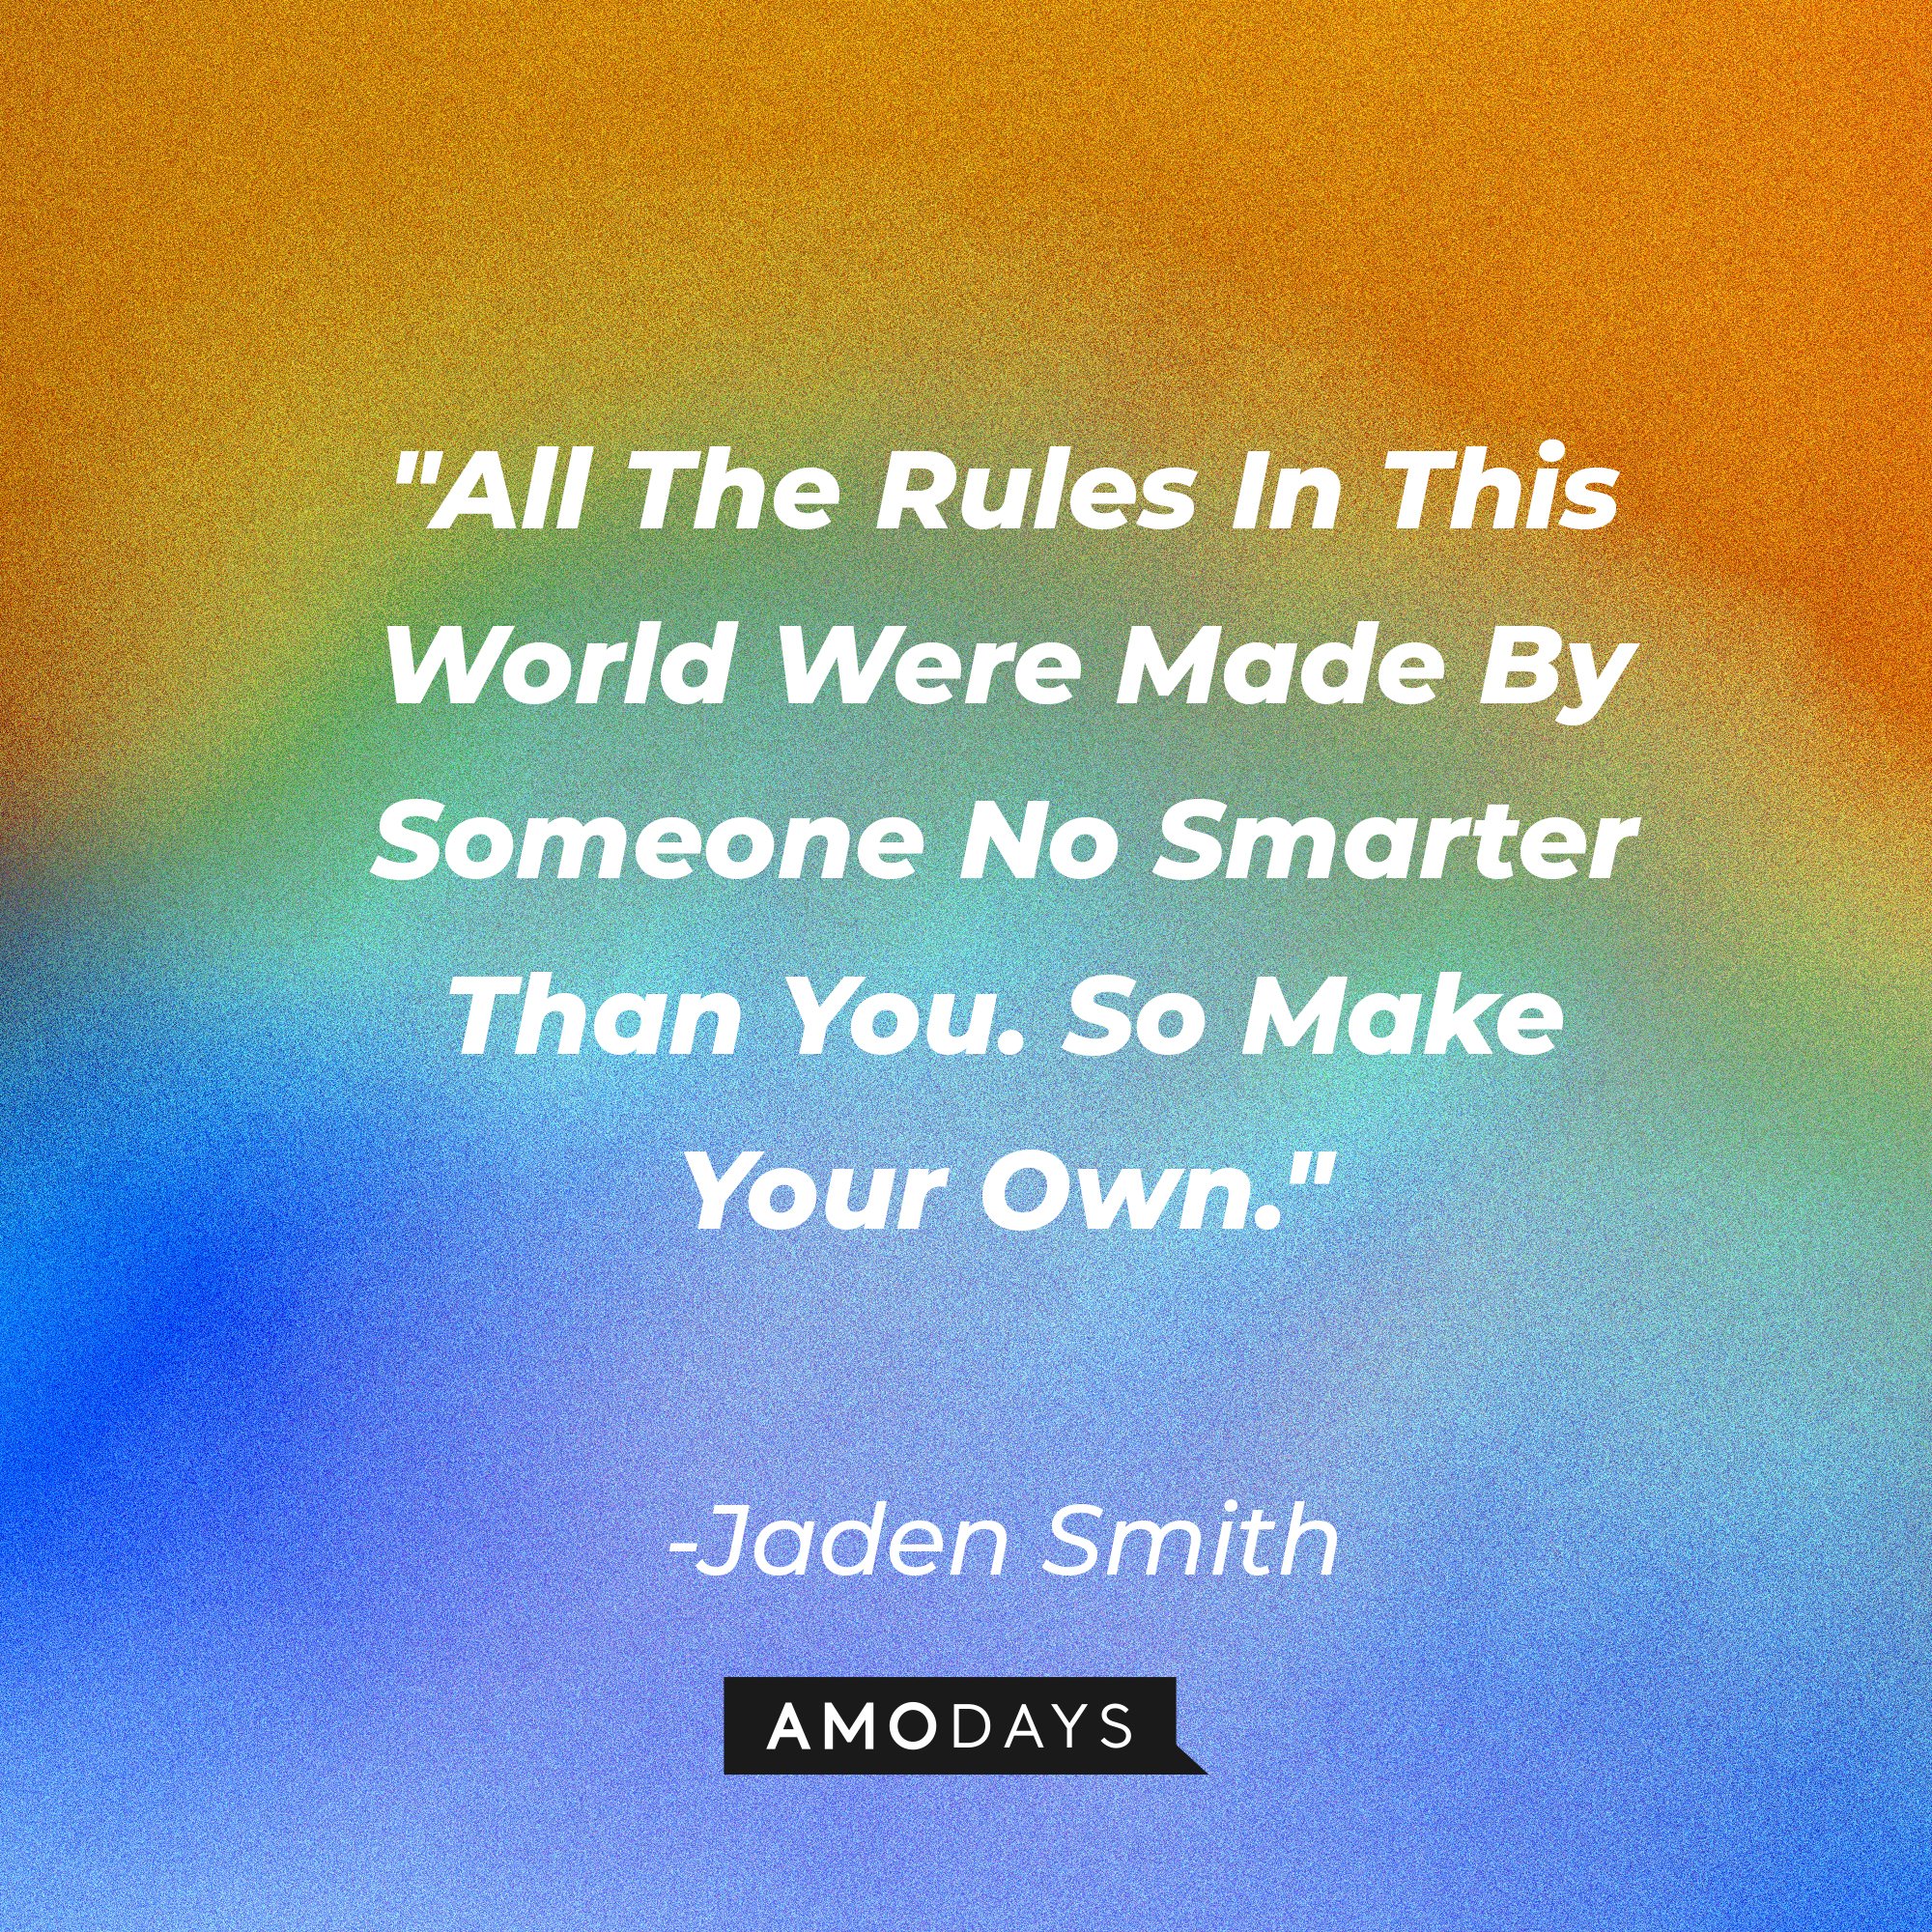 Jaden Smith's quote: "All The Rules In This World Were Made By Someone No Smarter Than You. So Make Your Own." | Image: AmoDays